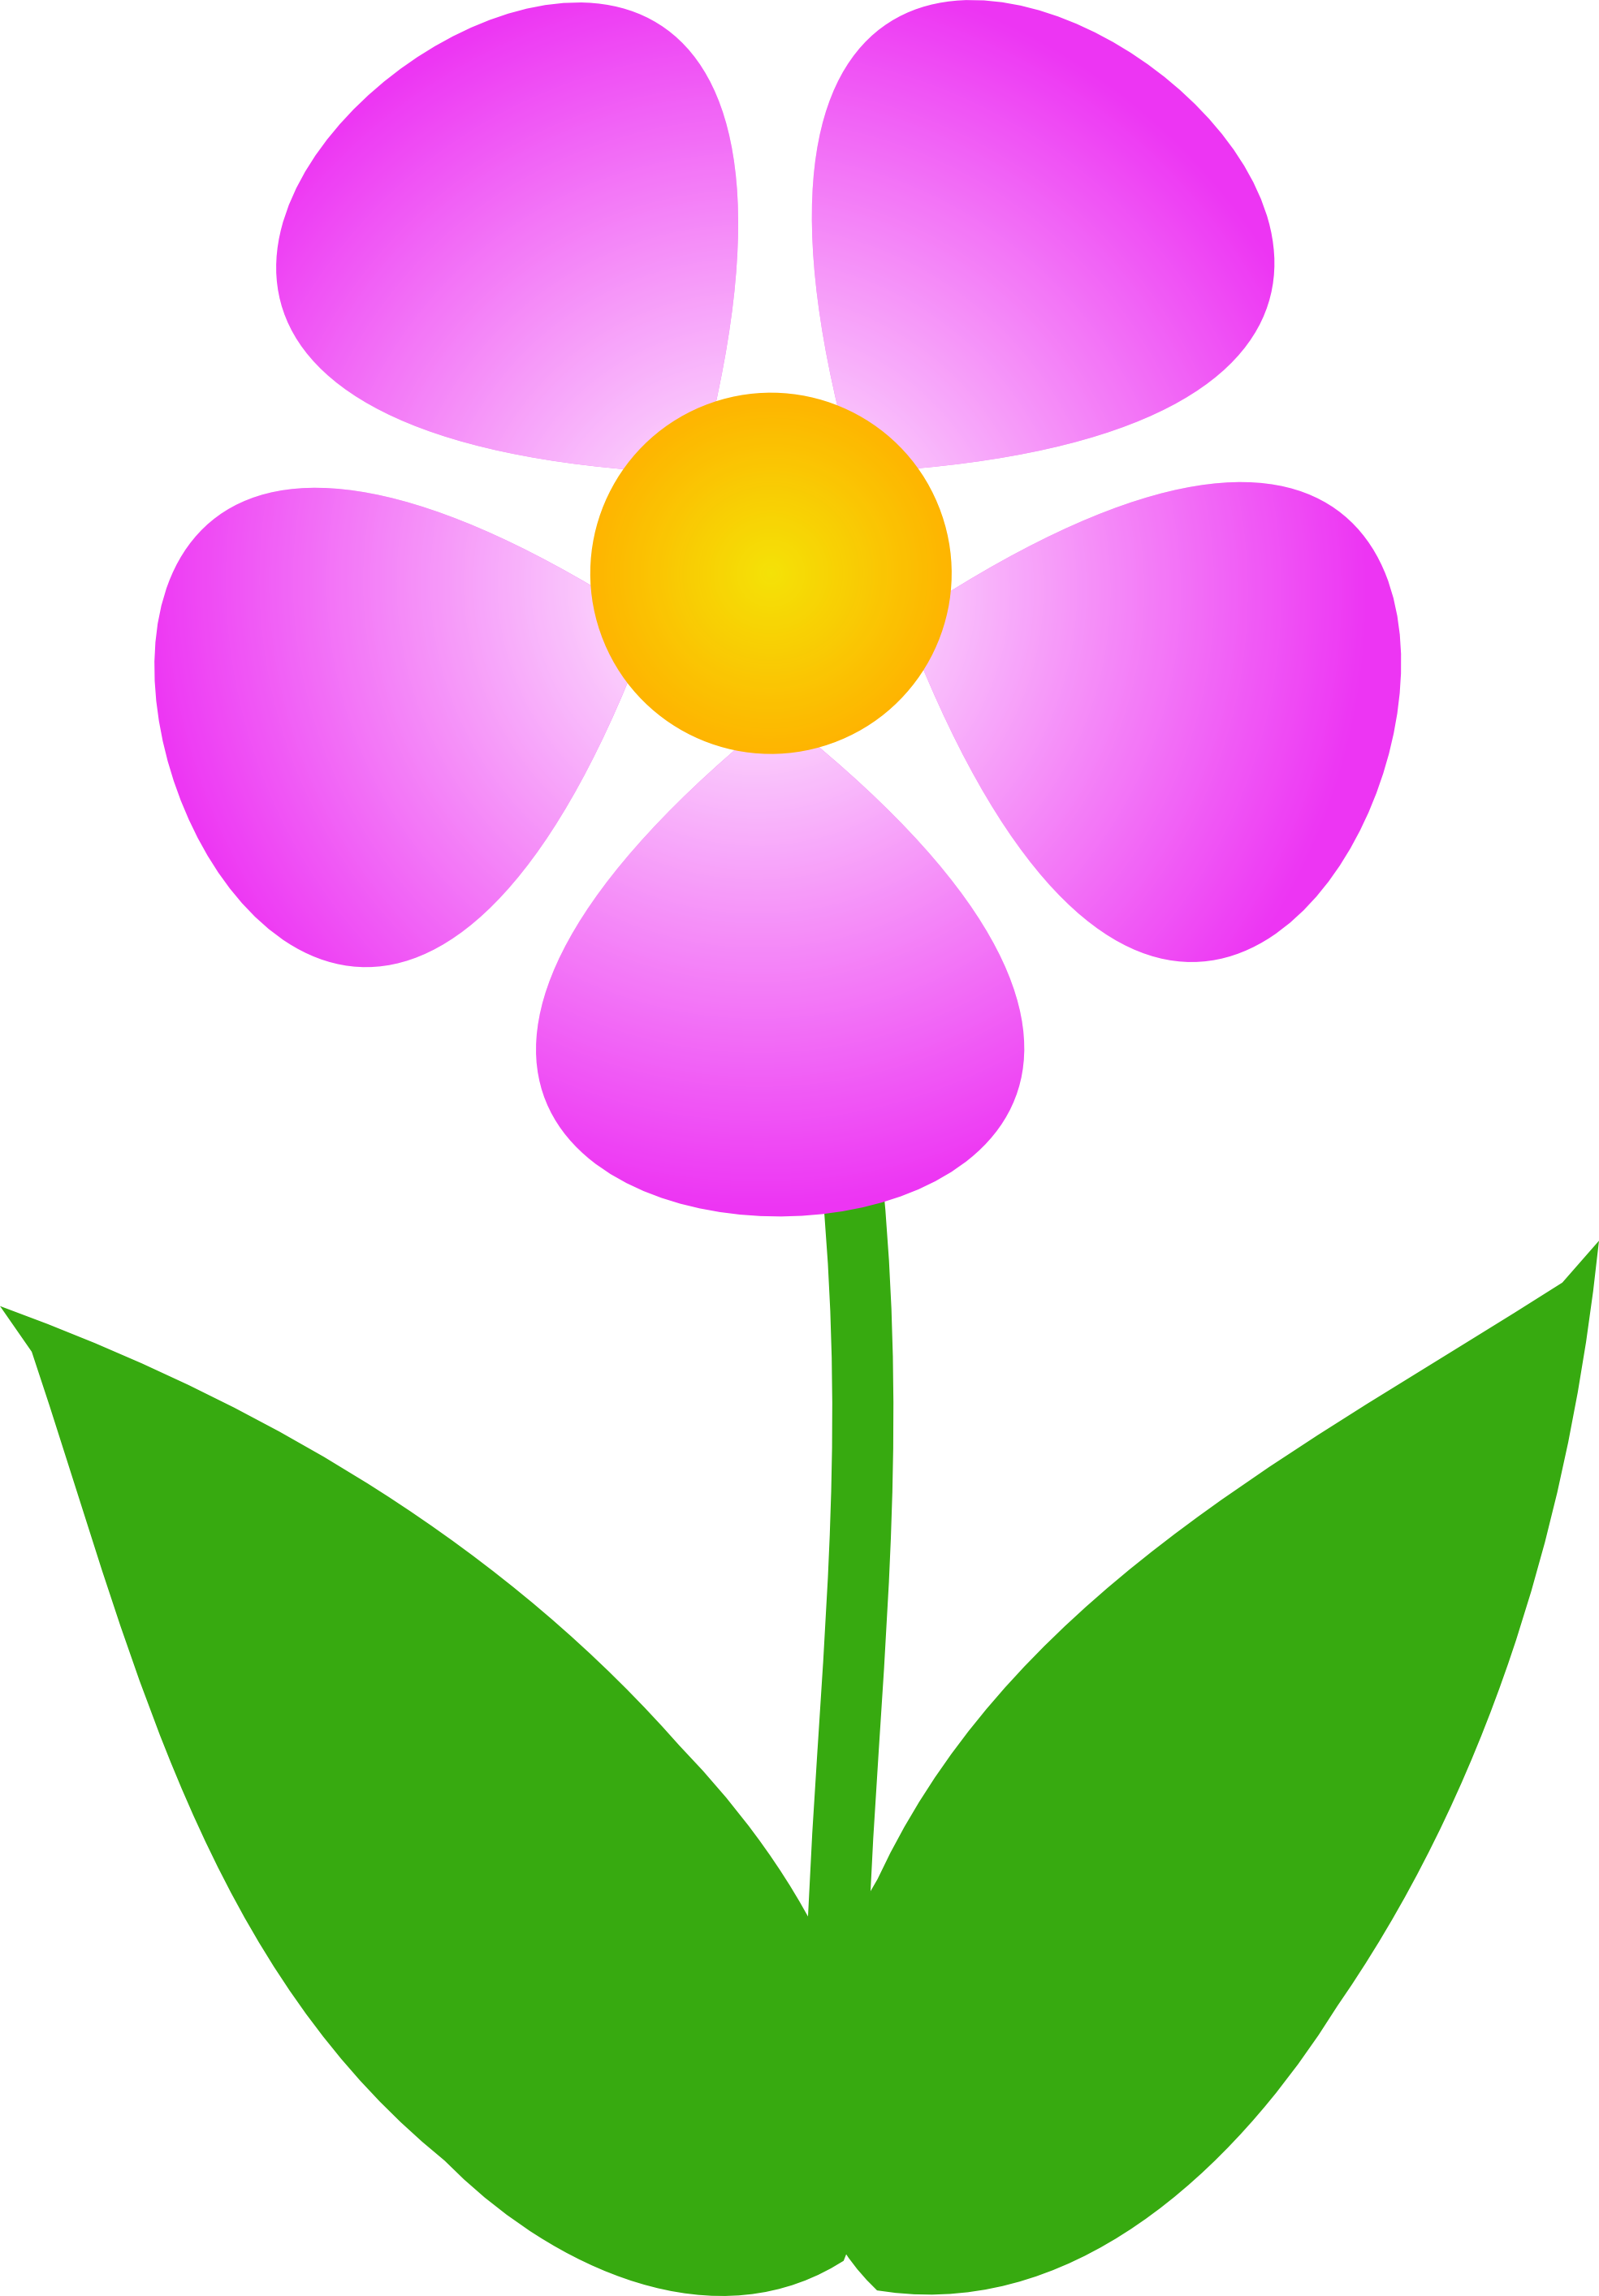 flower clipart download free - photo #40